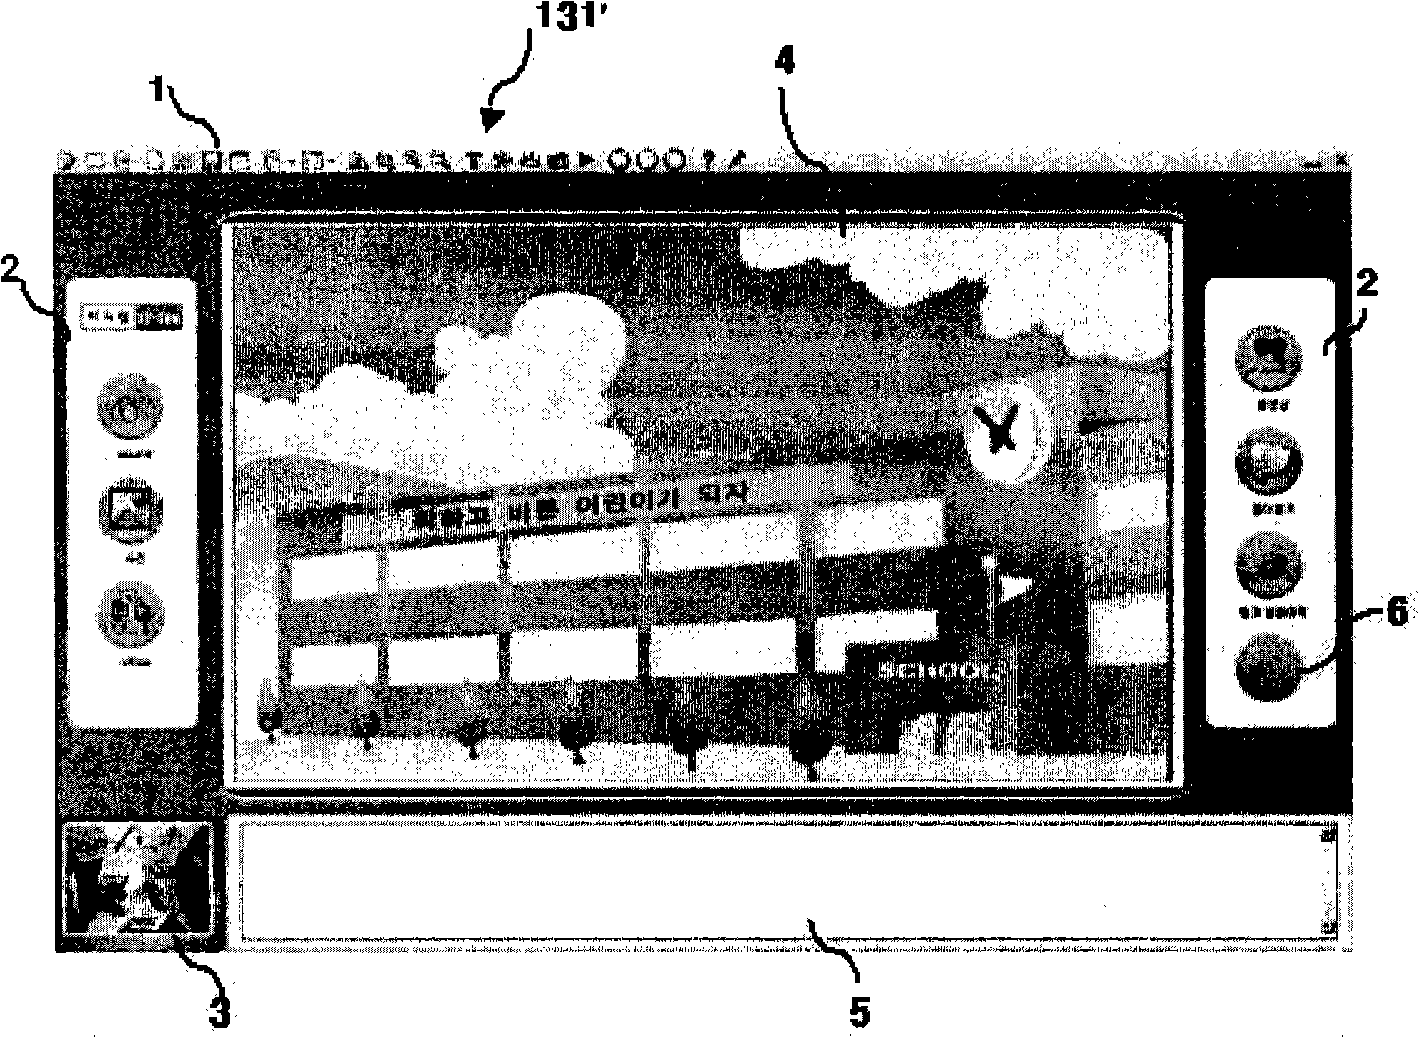 Image link teaching device